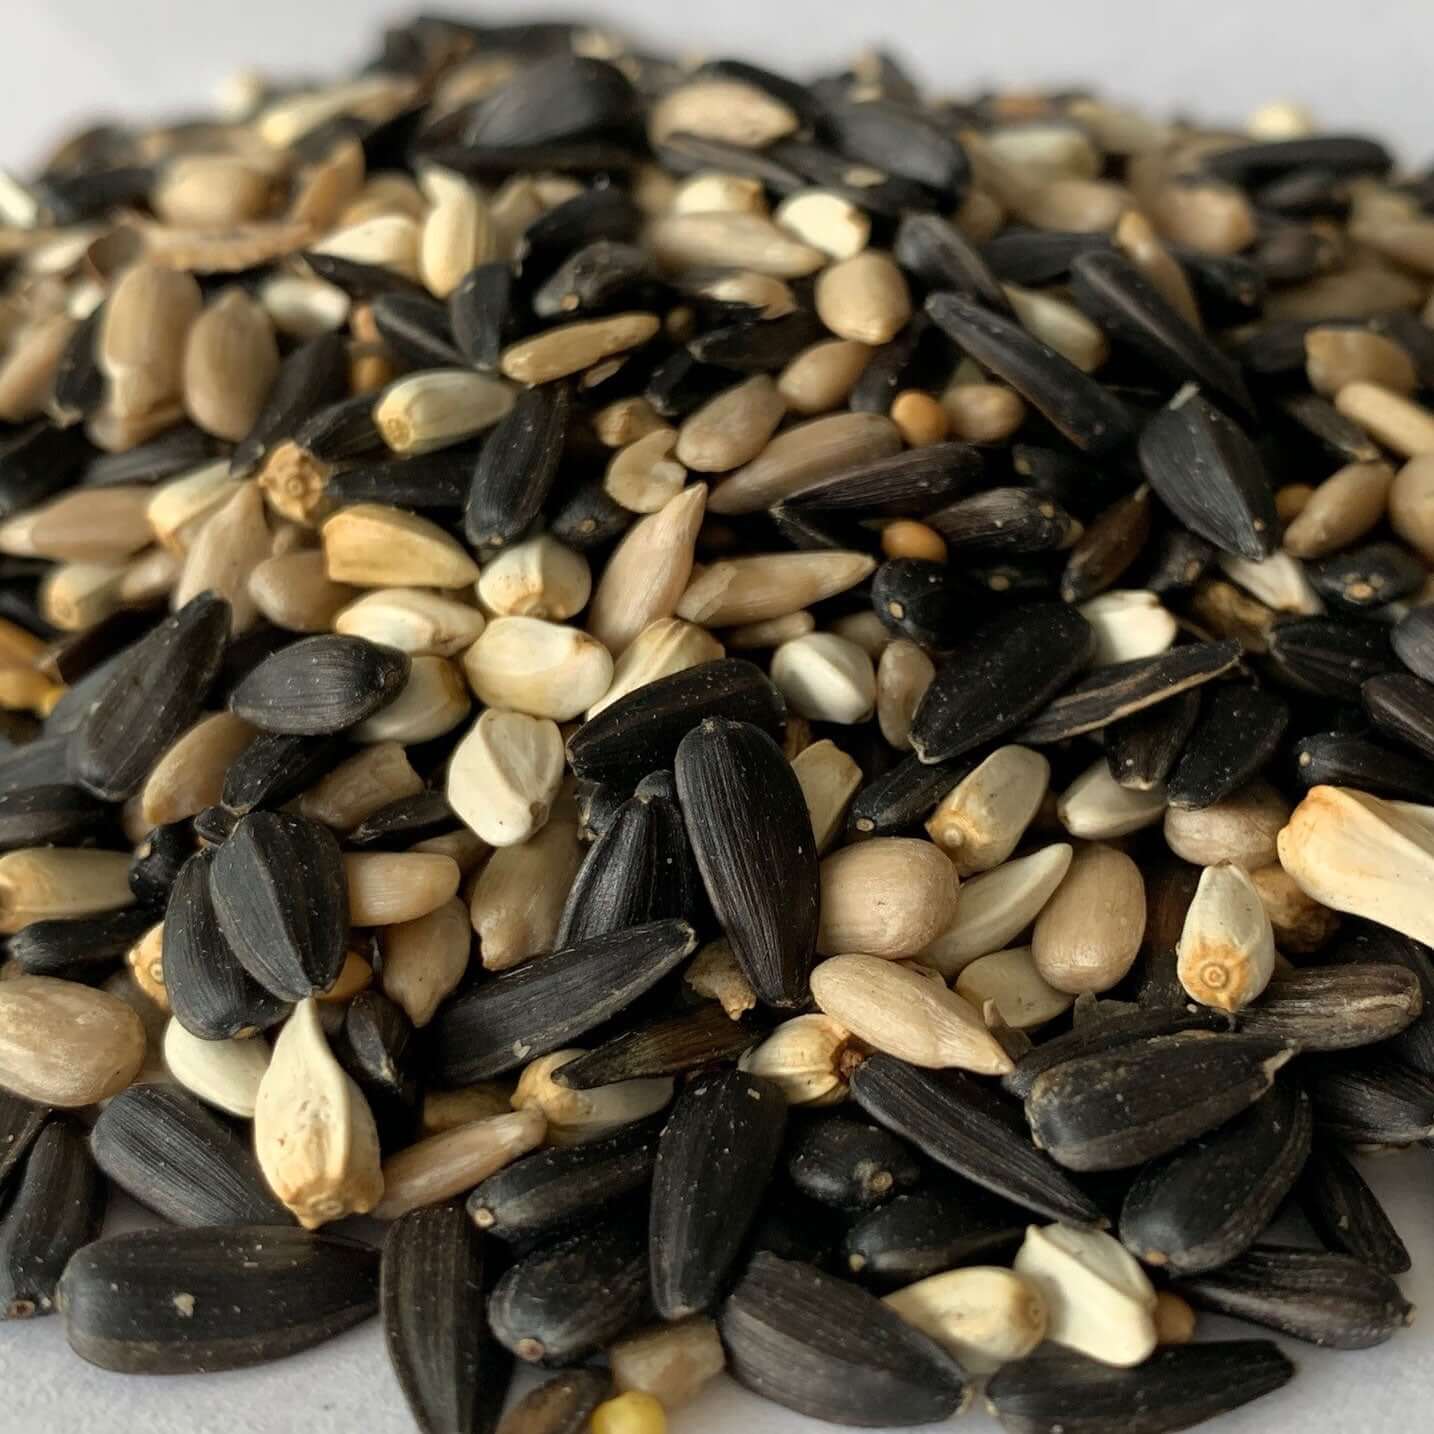 Feeder Seed contains Black Sunflower (the high oil sunflower) and also high-energy Hemp and beneficial Safflower. This bird food mix is so popular you may need more than one tube feeder!